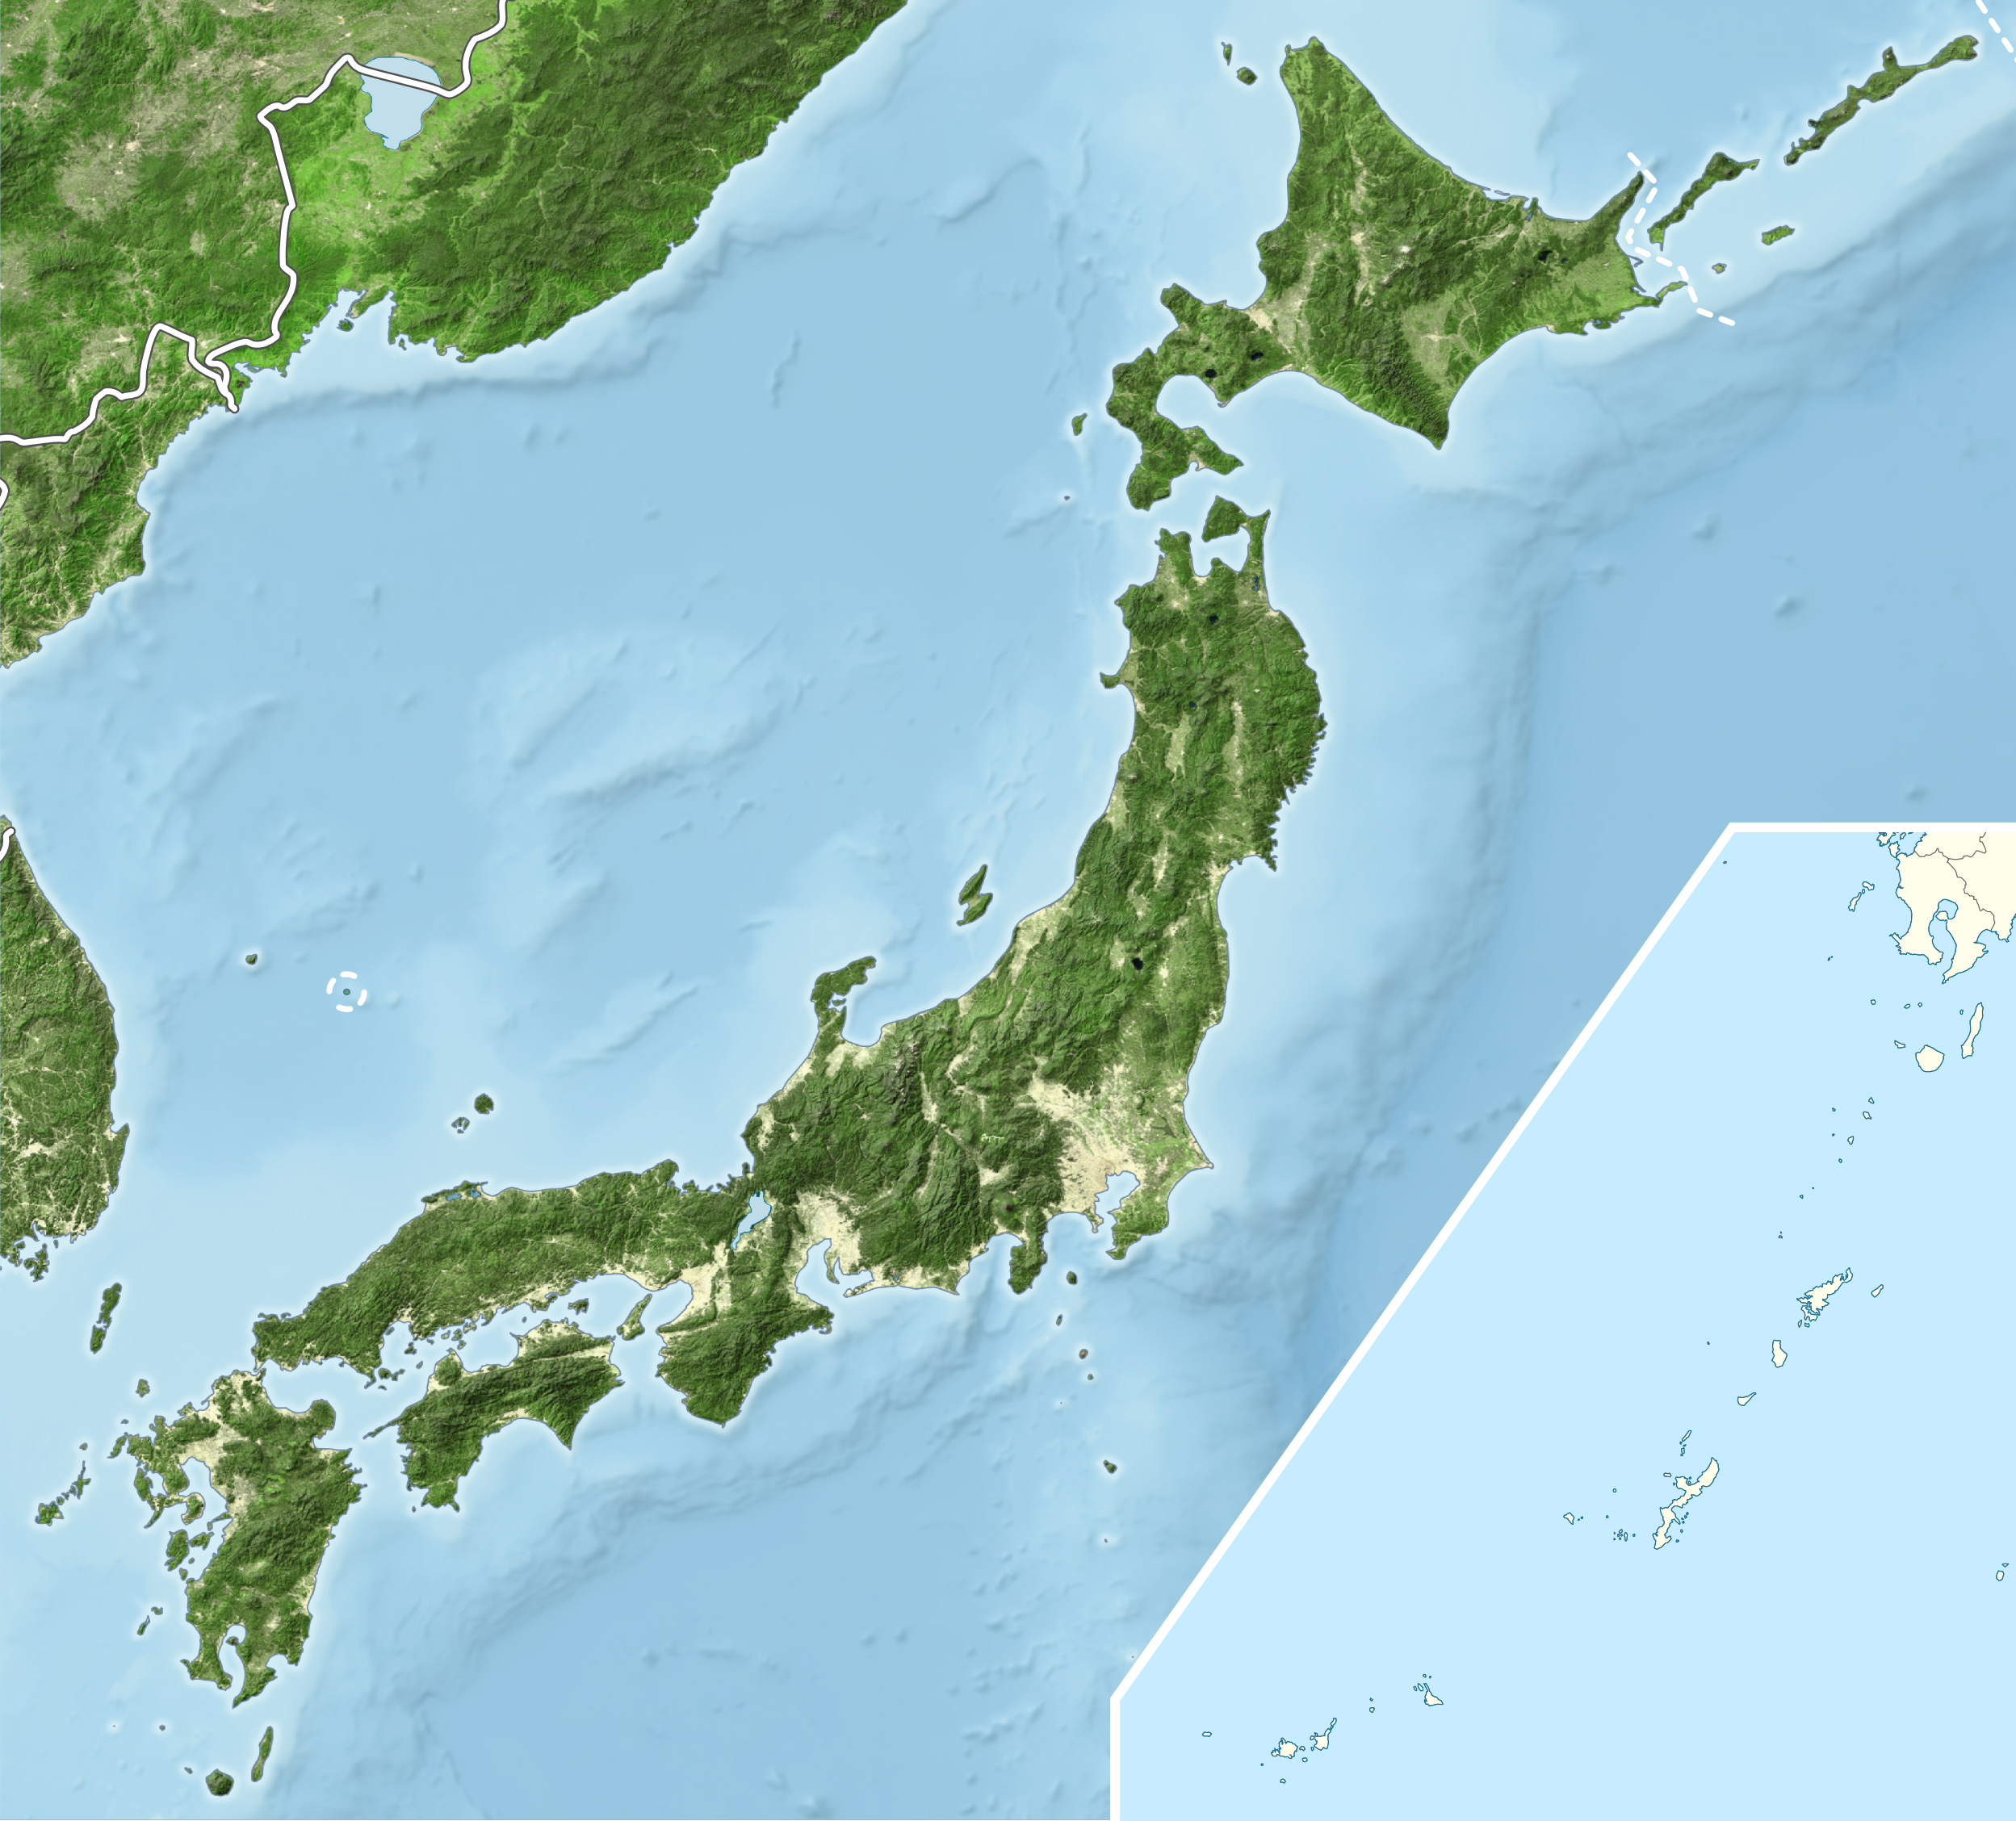 Japan bluemarble location map with side map of the Ryukyu Islands